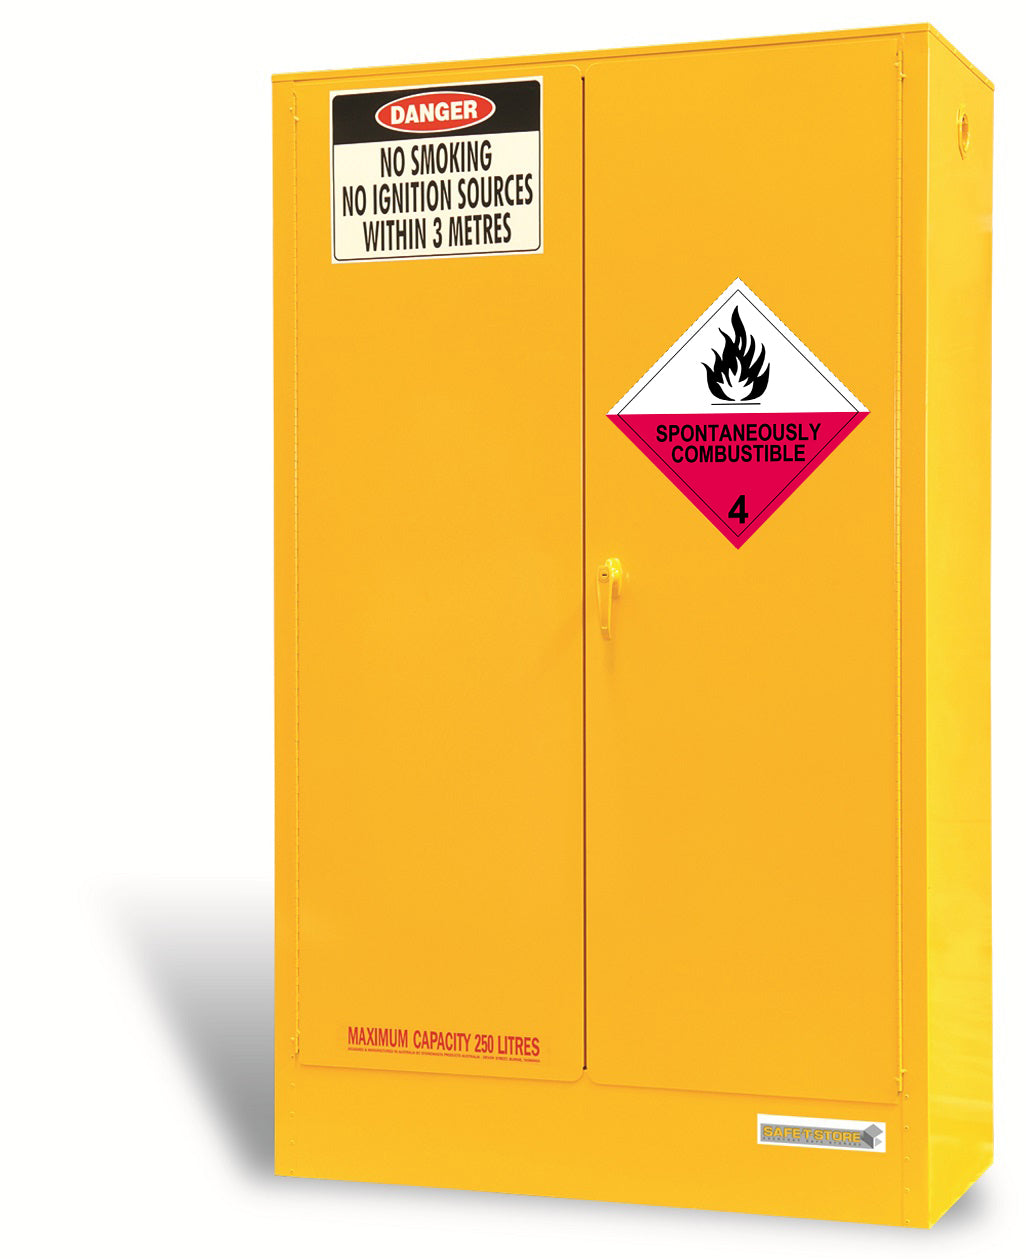 Class 4.2 - Spontaneously Combustible Substance Storage Cabinets